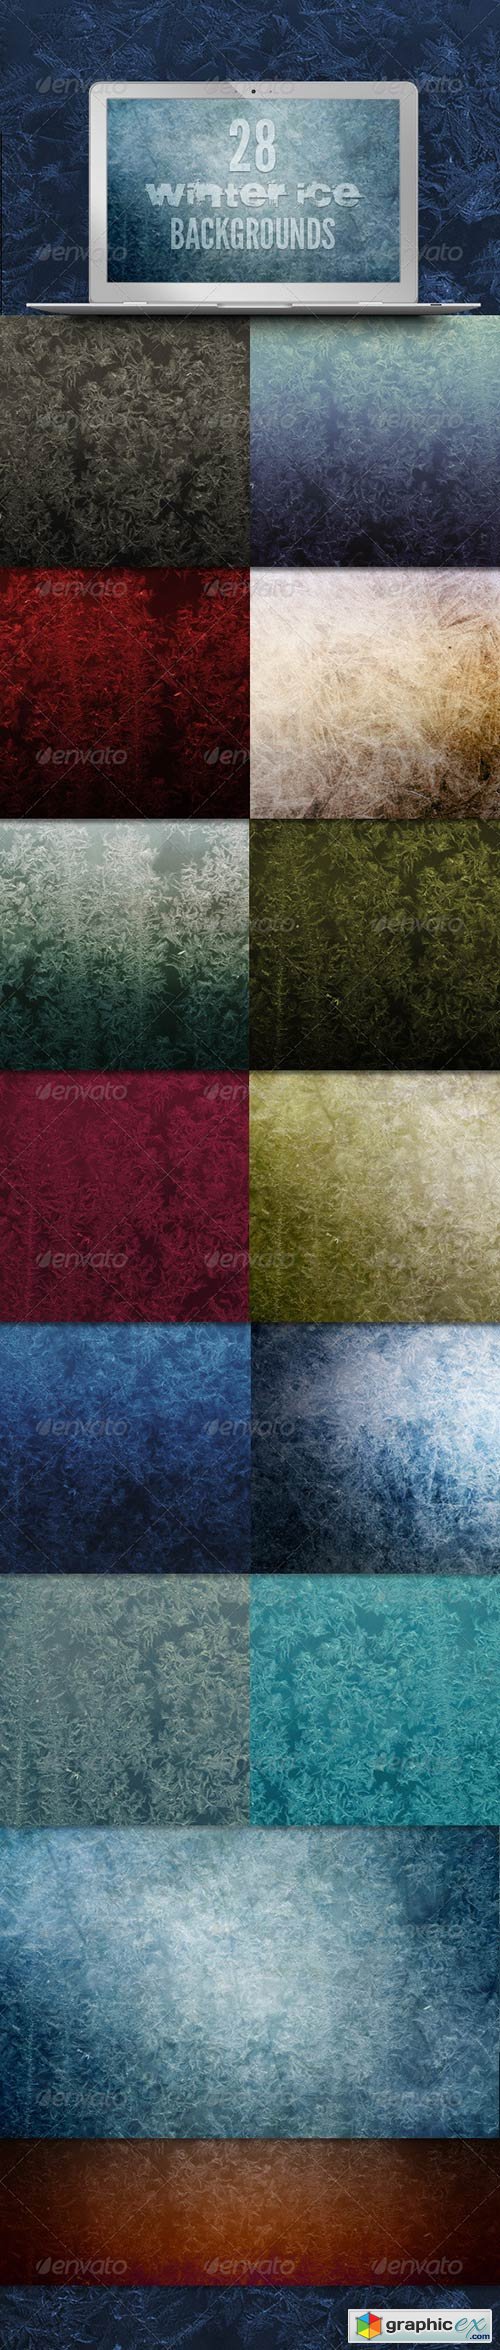 GraphicRiver - 28 Winter Ice Backgrounds 3525570